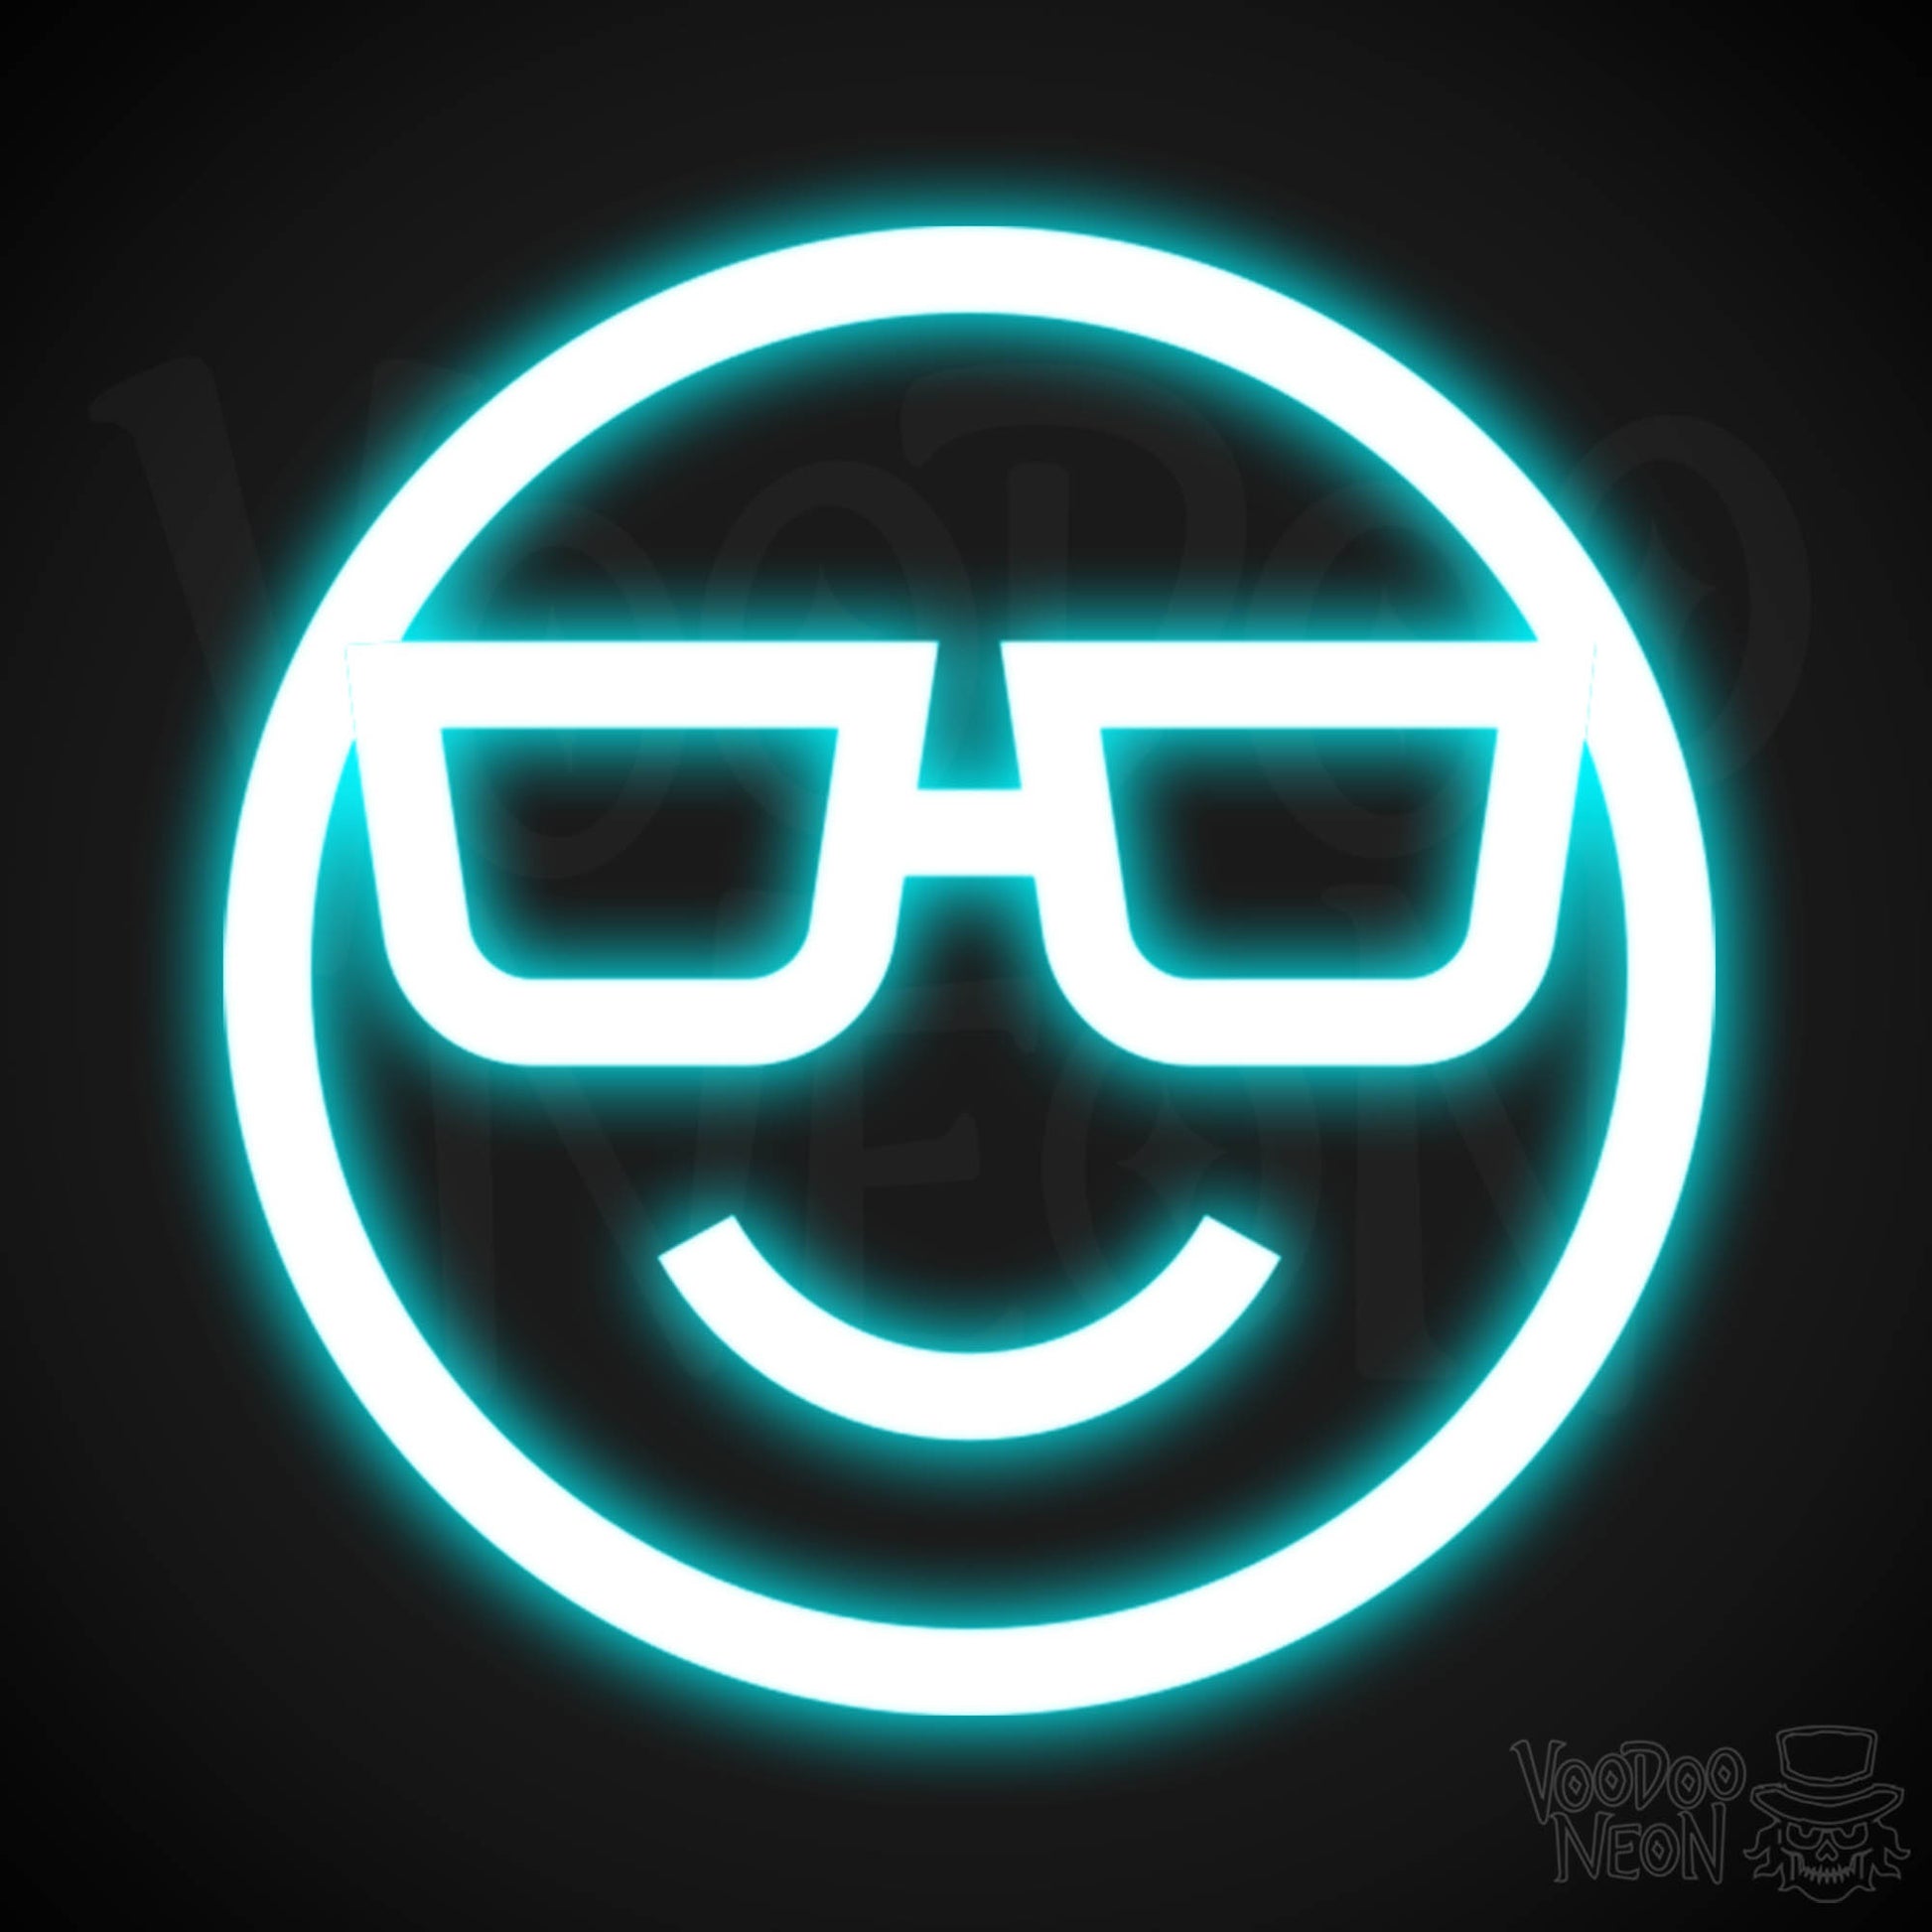 Neon Smiley Face - Smiley Face Neon Sign - LED Wall Art - Color Ice Blue